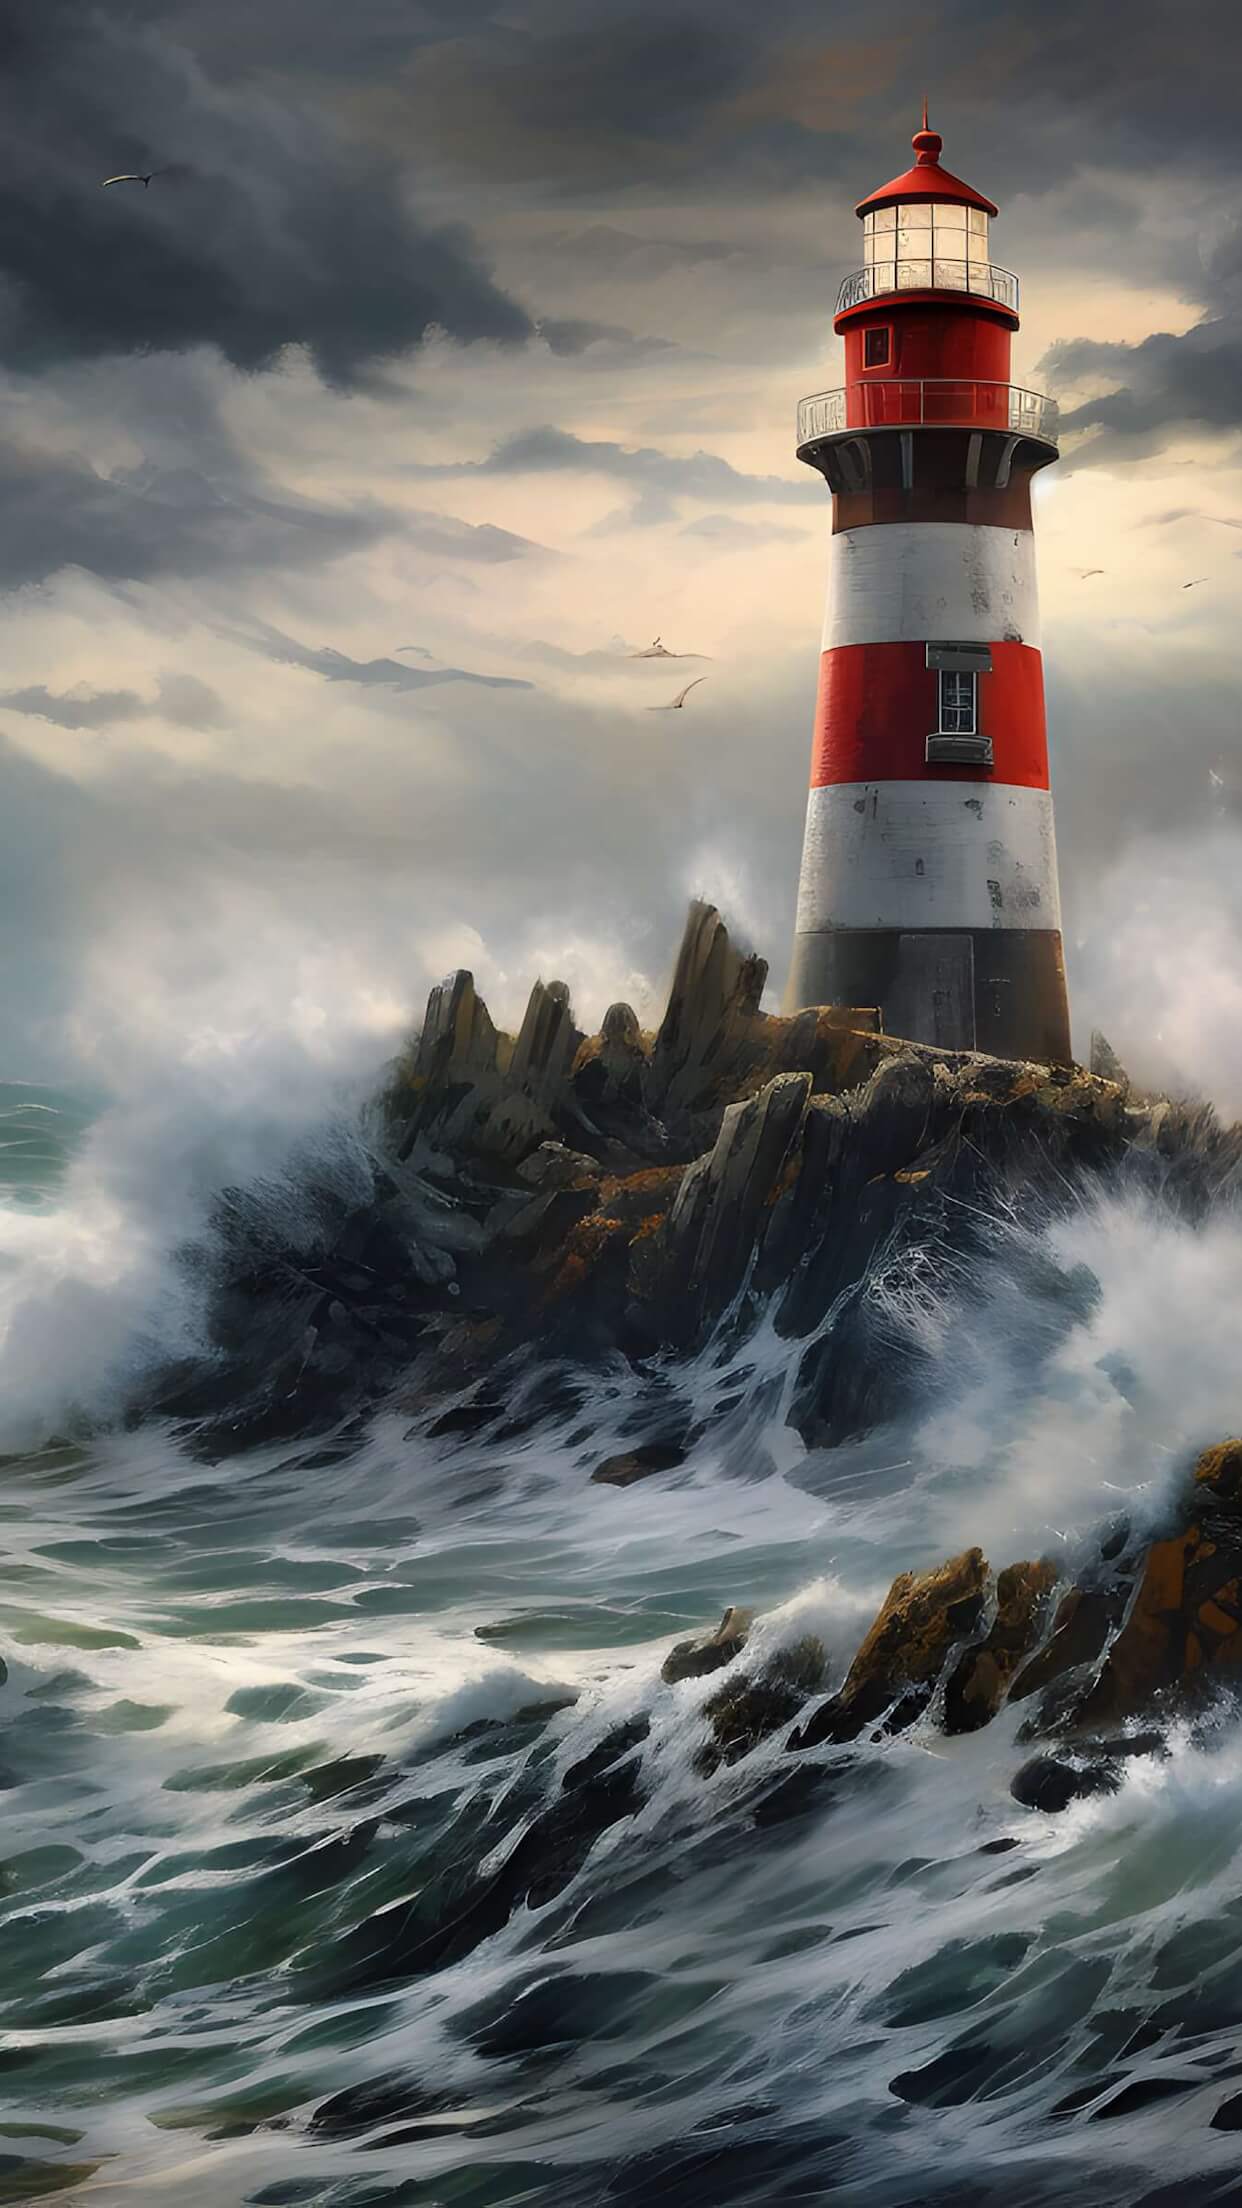 Lighthouse in the ocean waves wallpaper 1242x2208